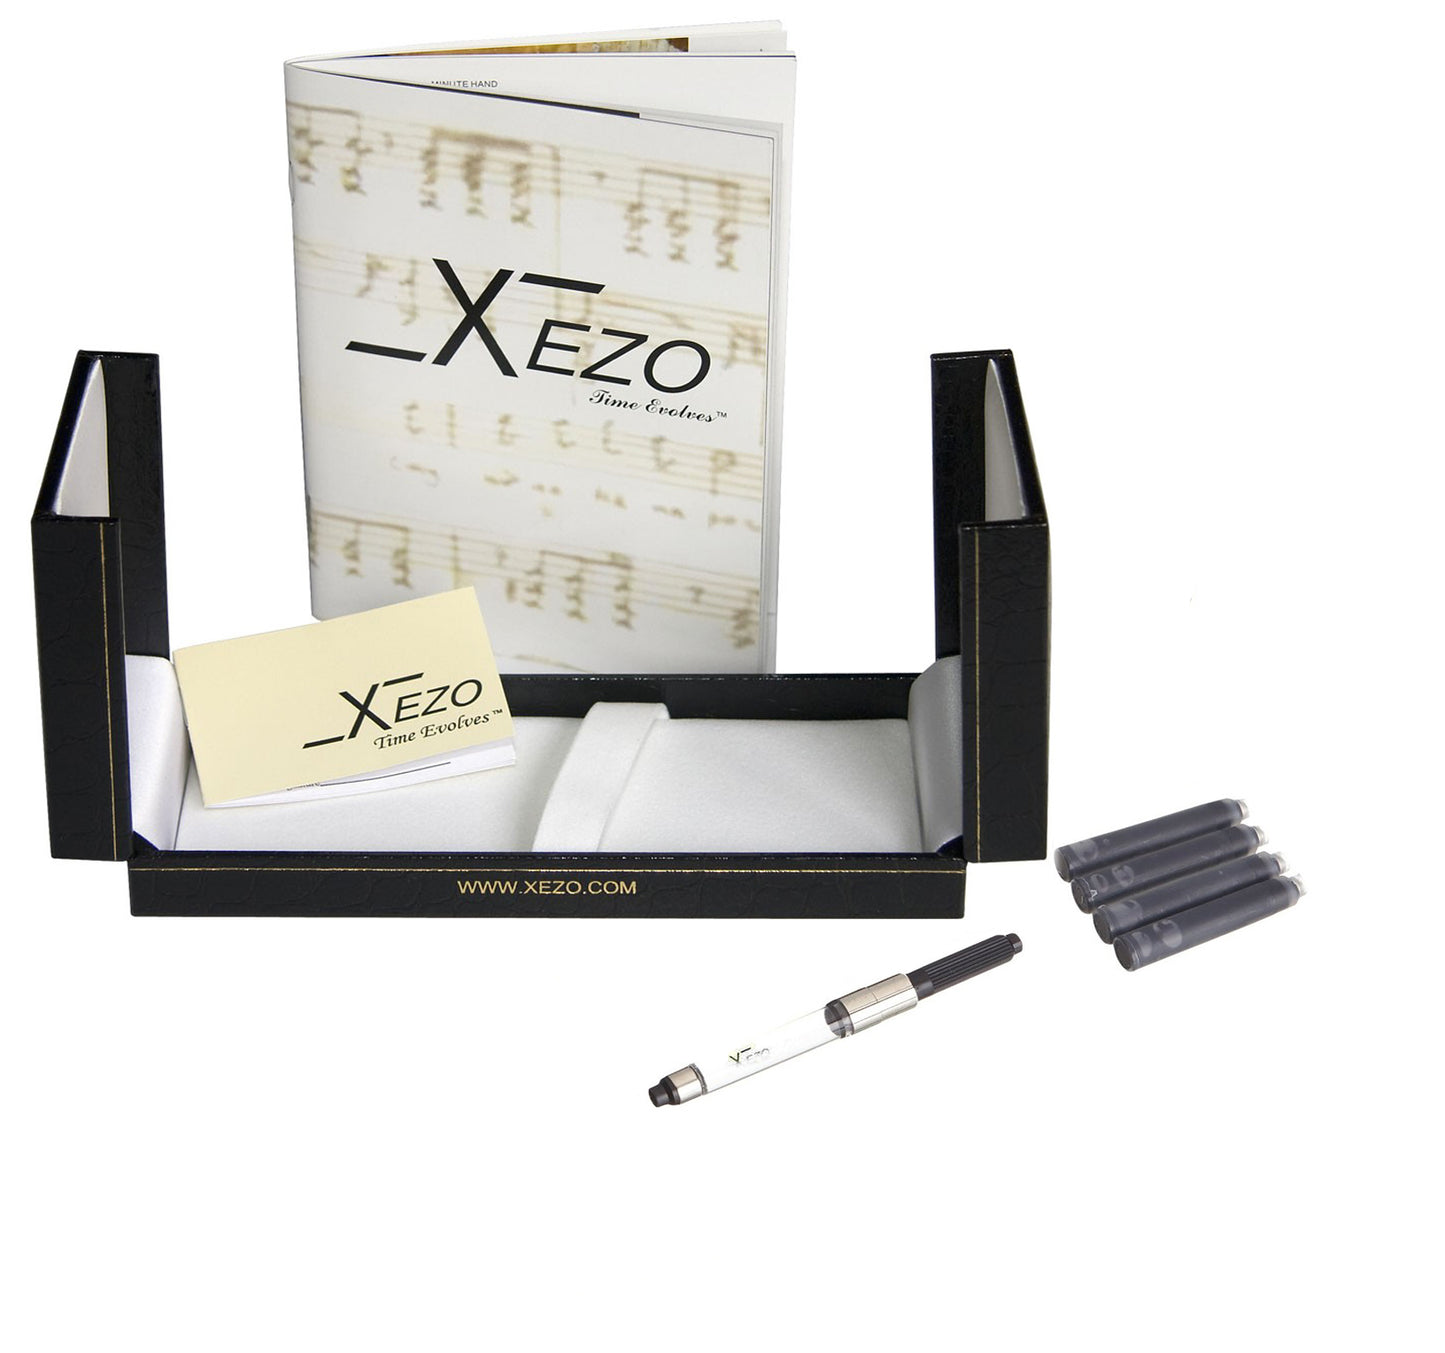 Xezo - Black gift box, certificate, manual, chrome plated ink converter, and four ink cartridges of the Incognito 925 Sterling Silver F fountain pen